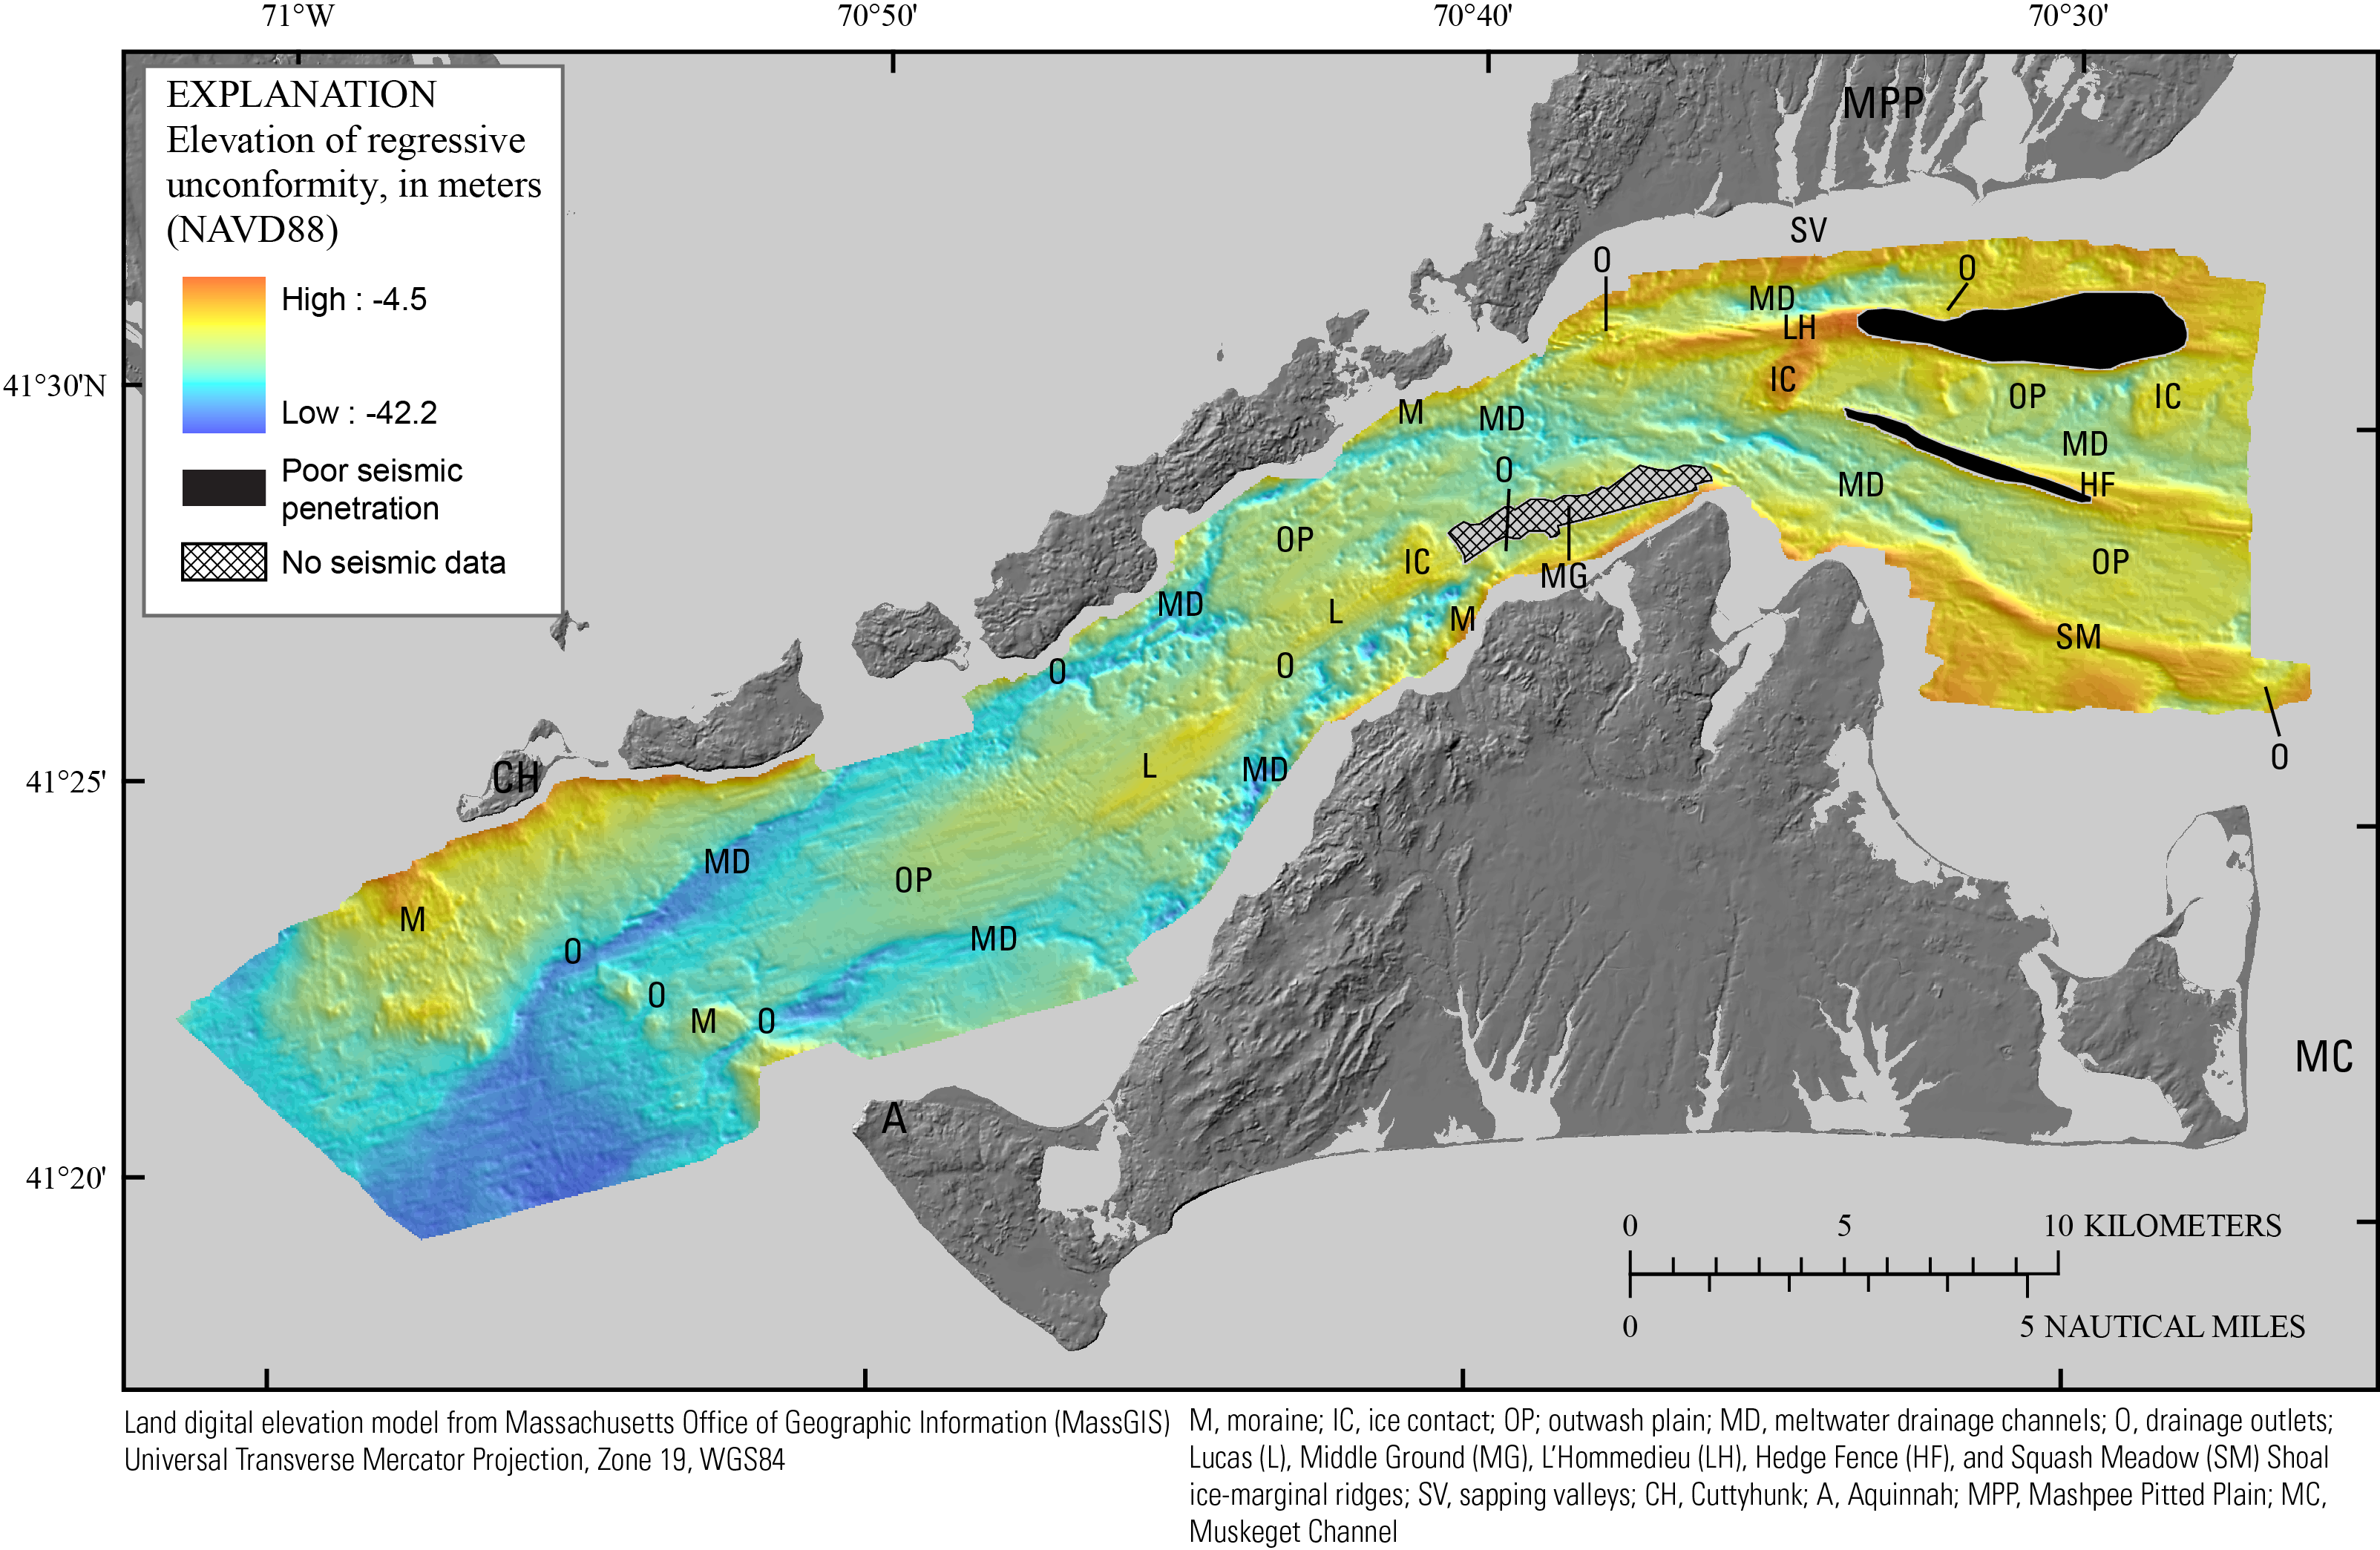 Simplified geological map of the area around the Bay of Fundy and